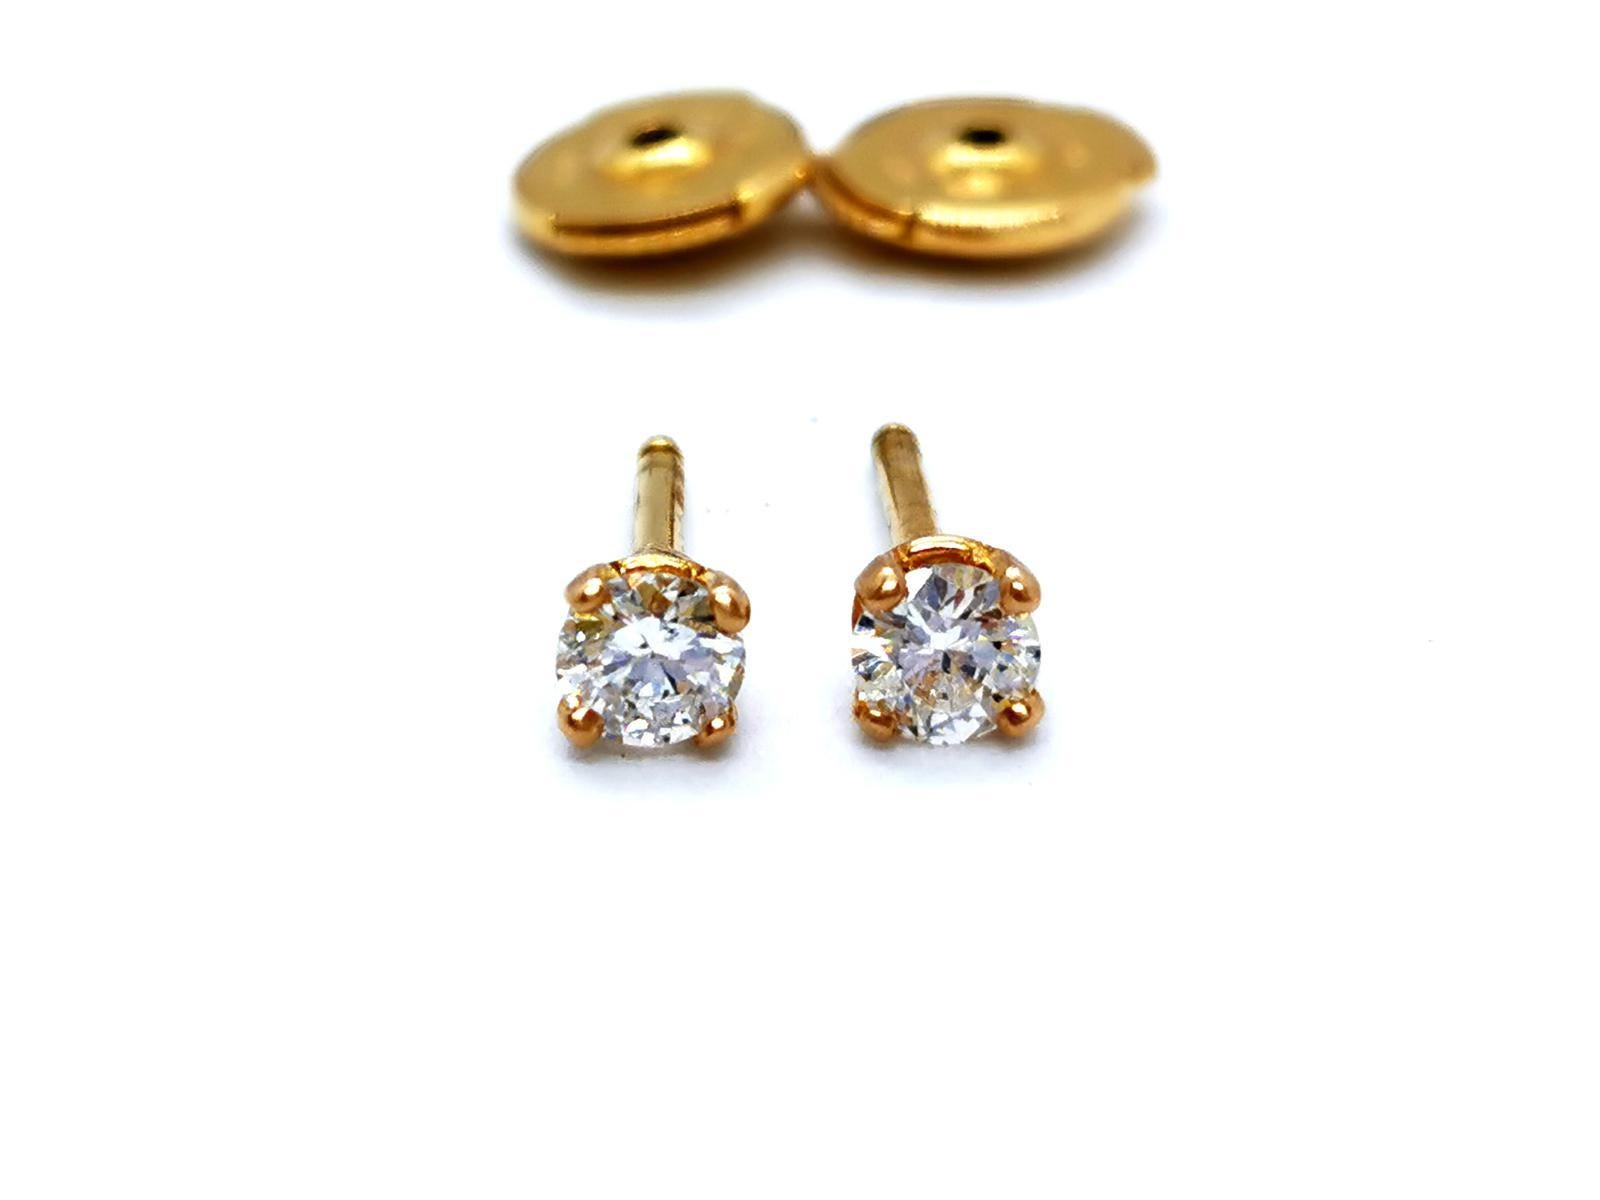 Earrings golden yellow 750 mils (18 carats). chip set with two brilliant cut diamonds of 0.17 ct each. total weight diamonds: 0.34 ct. clasp alpa. crimp claws 4. dimensions: 0.44 cm x 0.44 cm. total weight: 1.48 g. excellent condition
